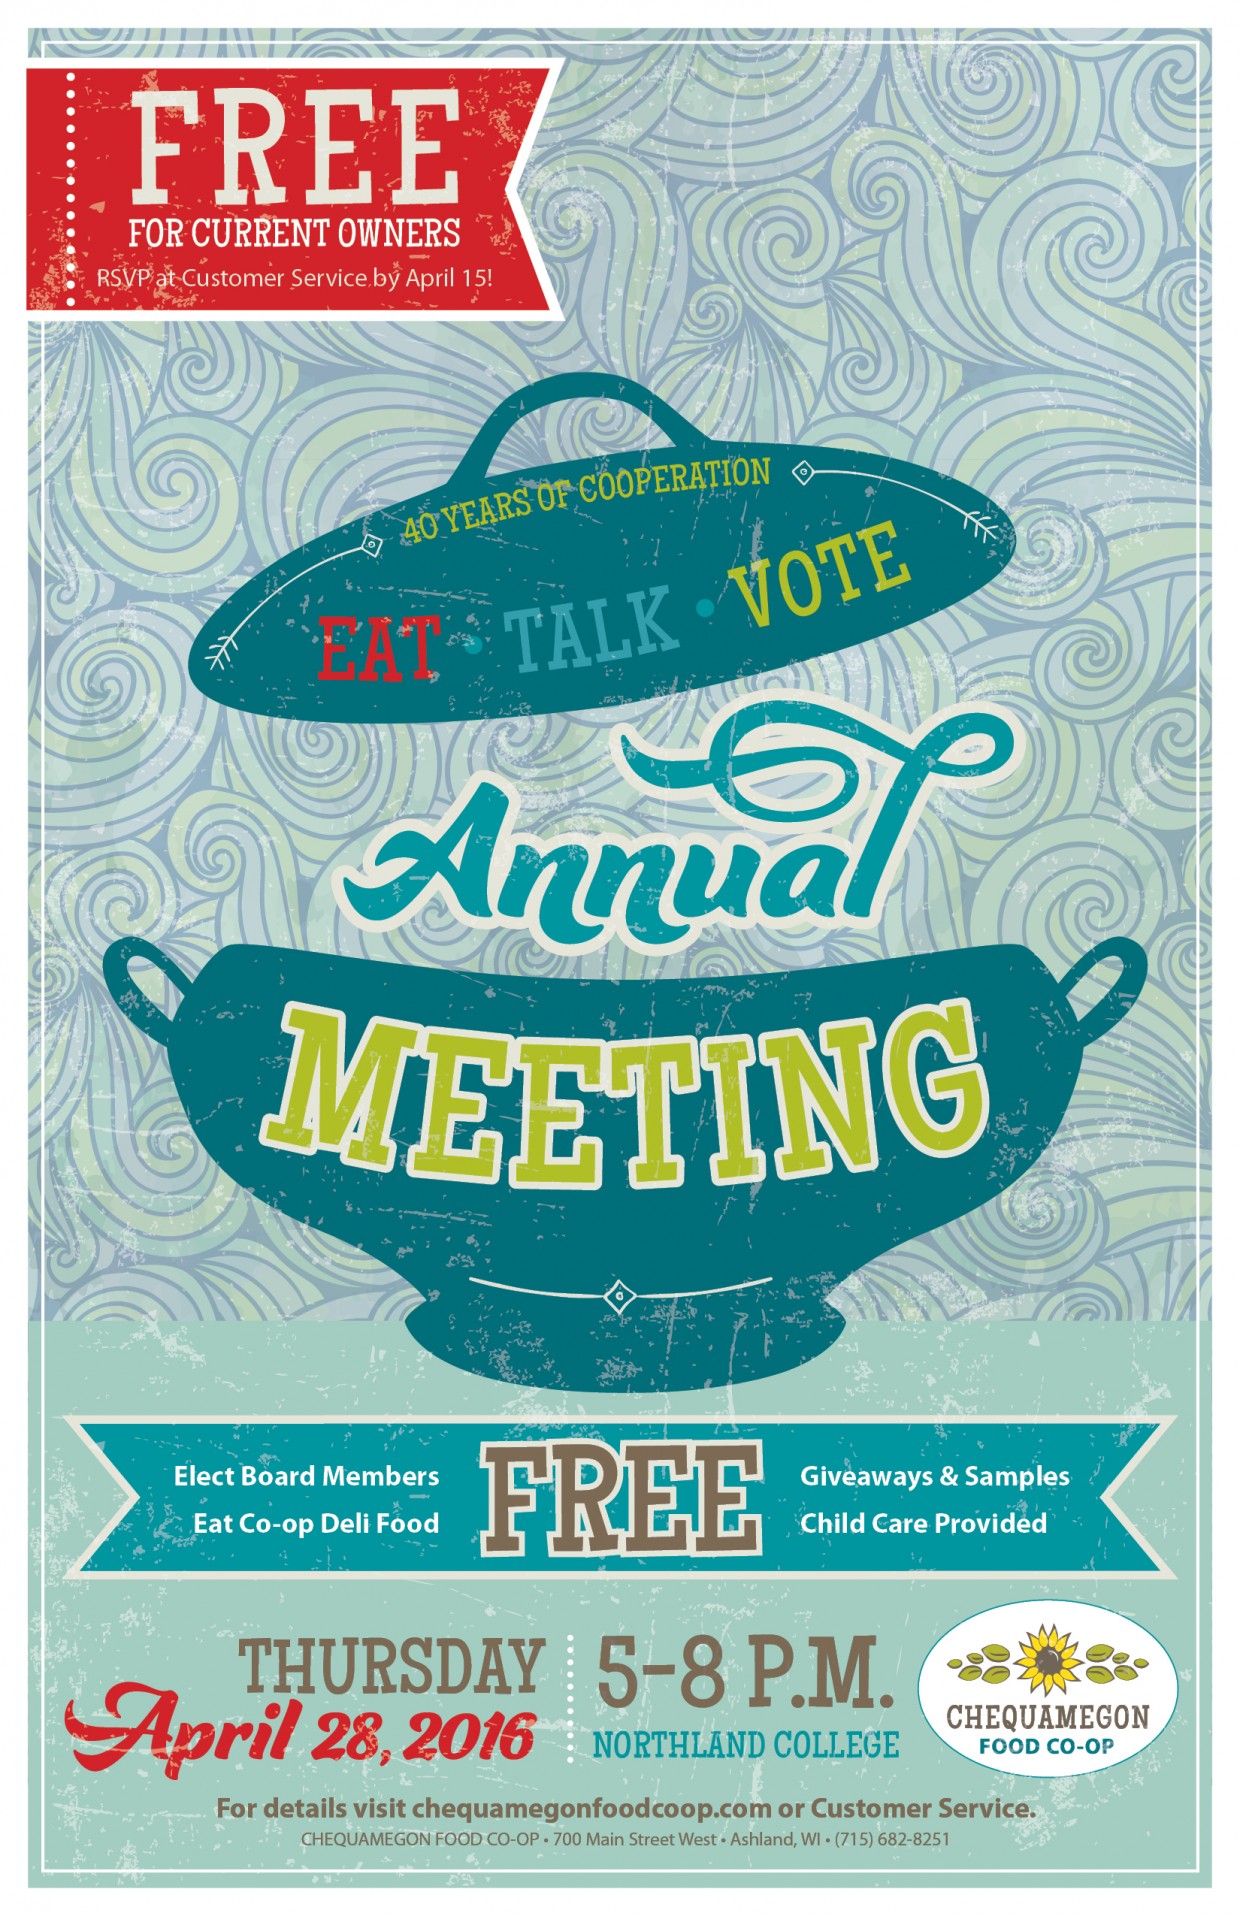 Eat, Talk, & Vote at the 2016 Annual Meeting!